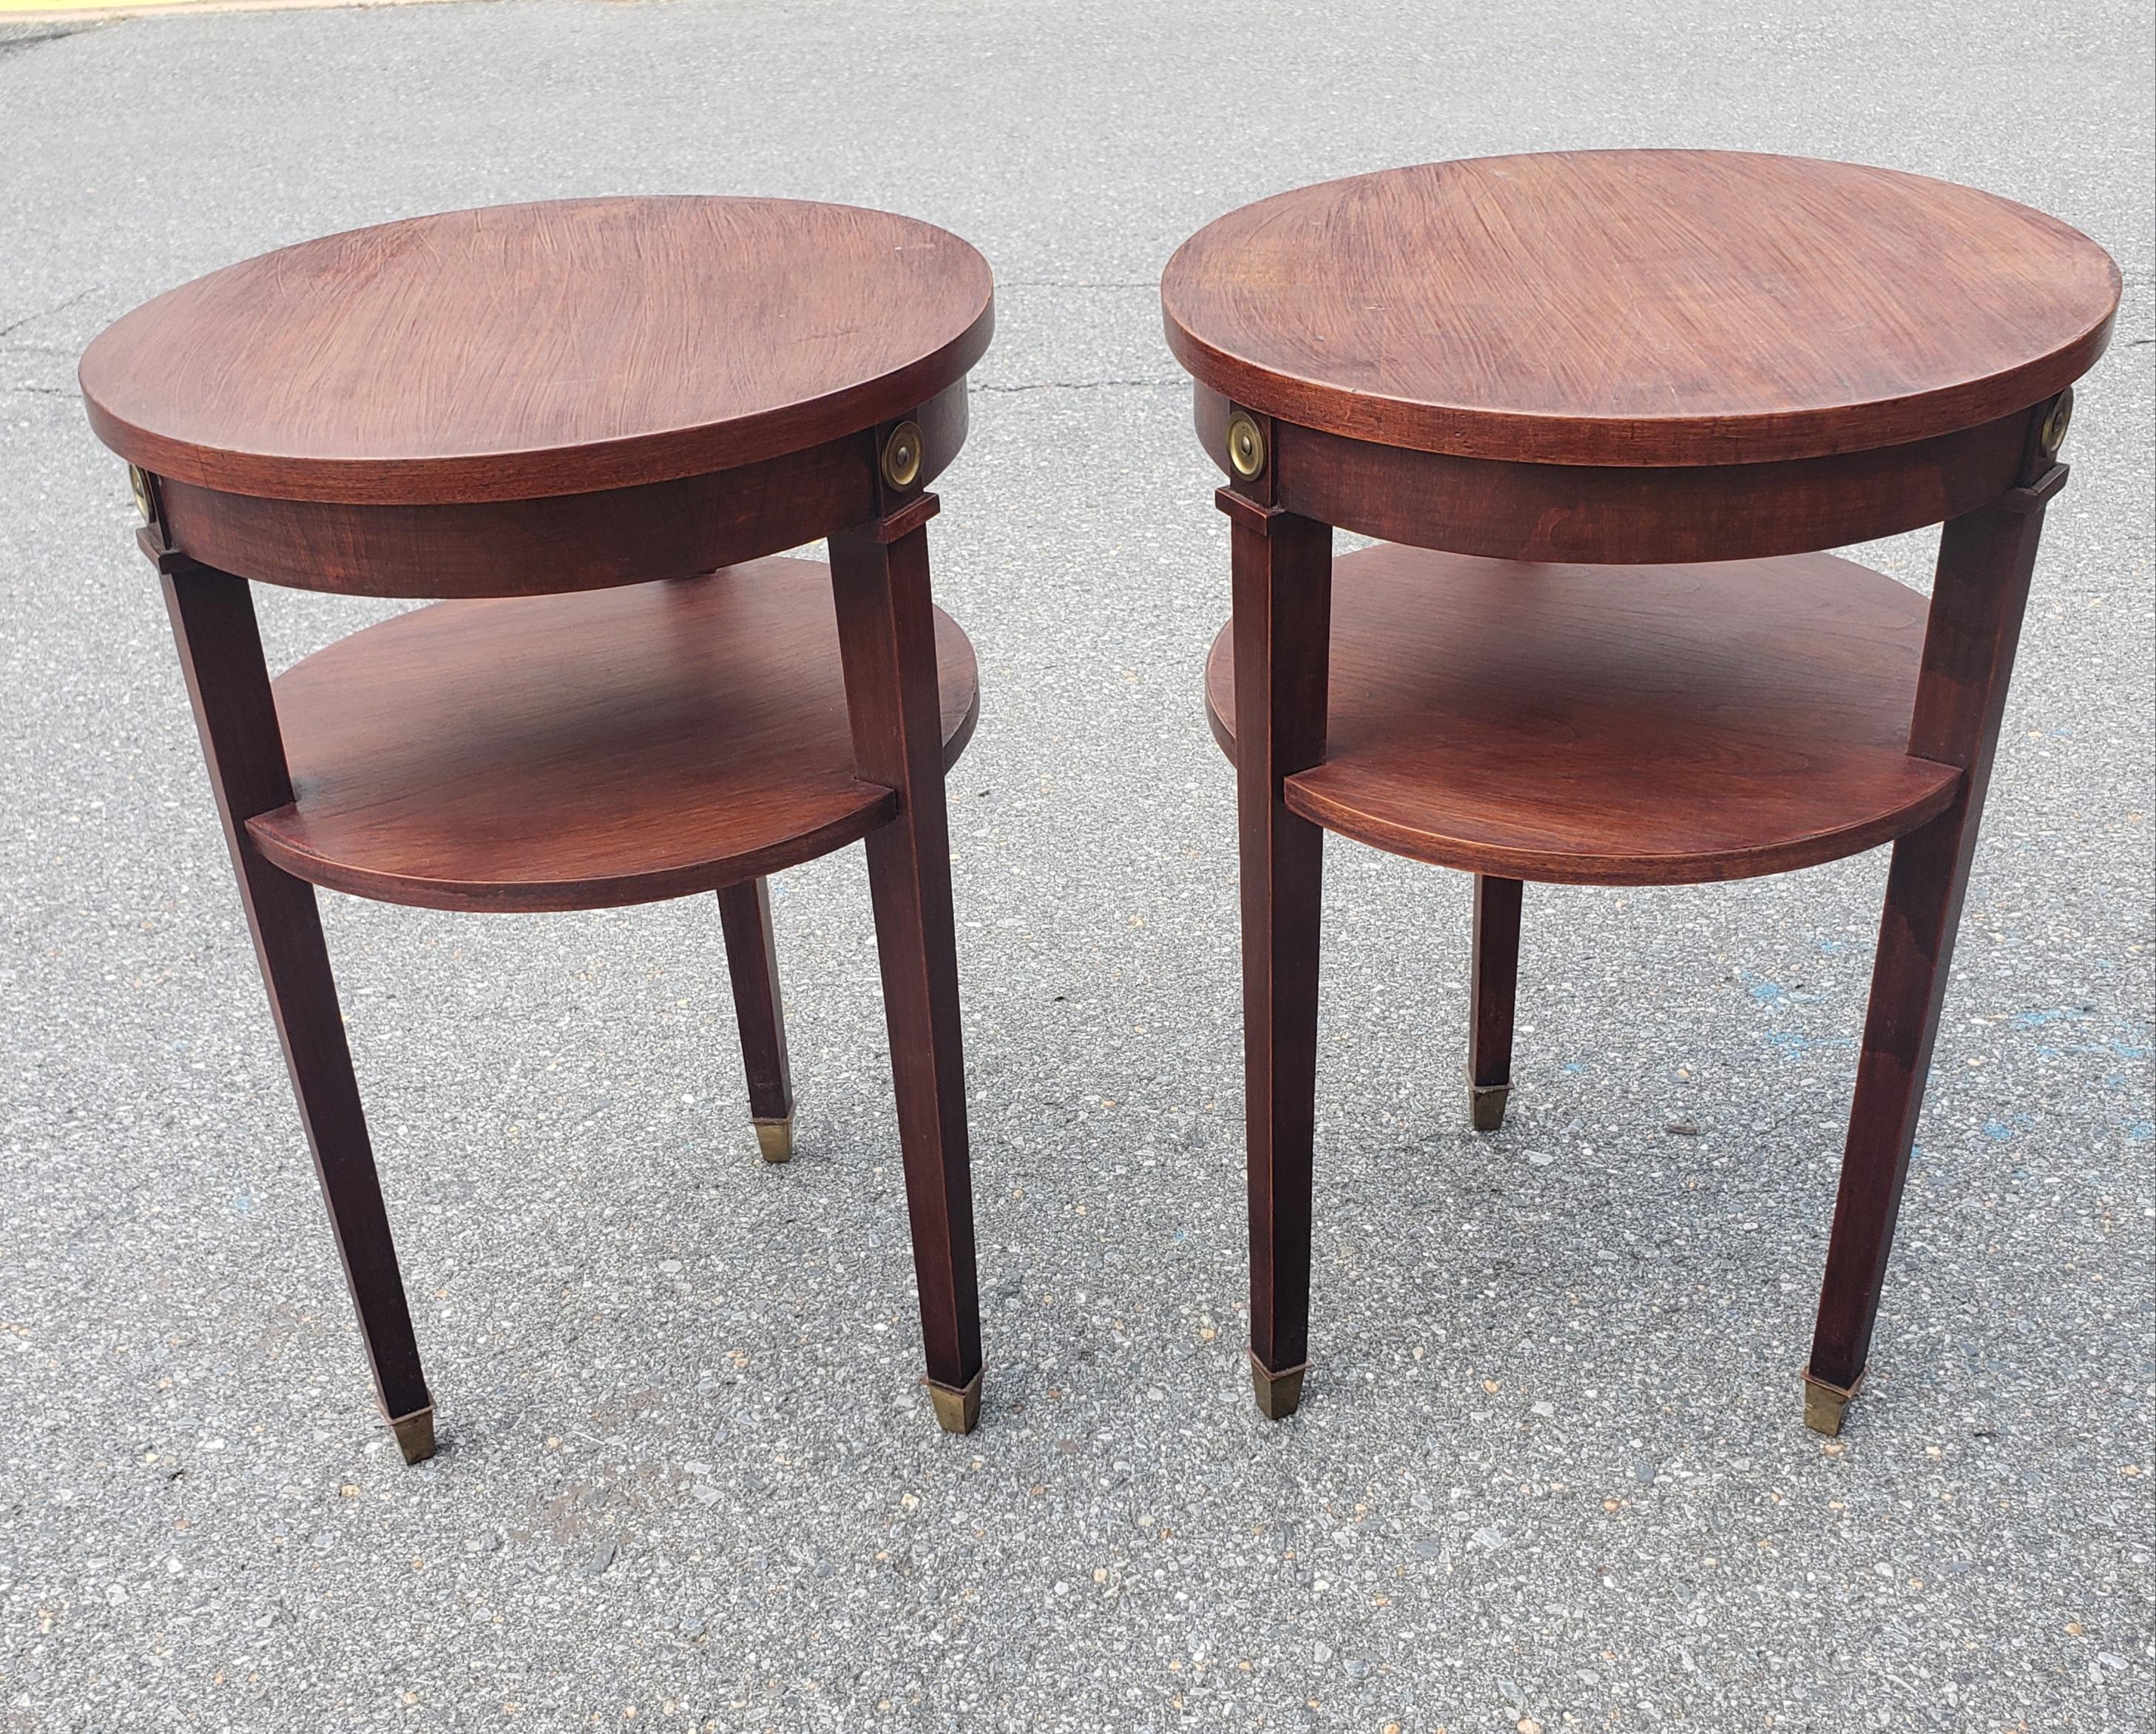 A midcentury Refinished Mahogany tiered round candle stands or Lamp Tables, side tables with tripod brass capped legs.
Very sturdy. Great vintage condition. Measure 17.5